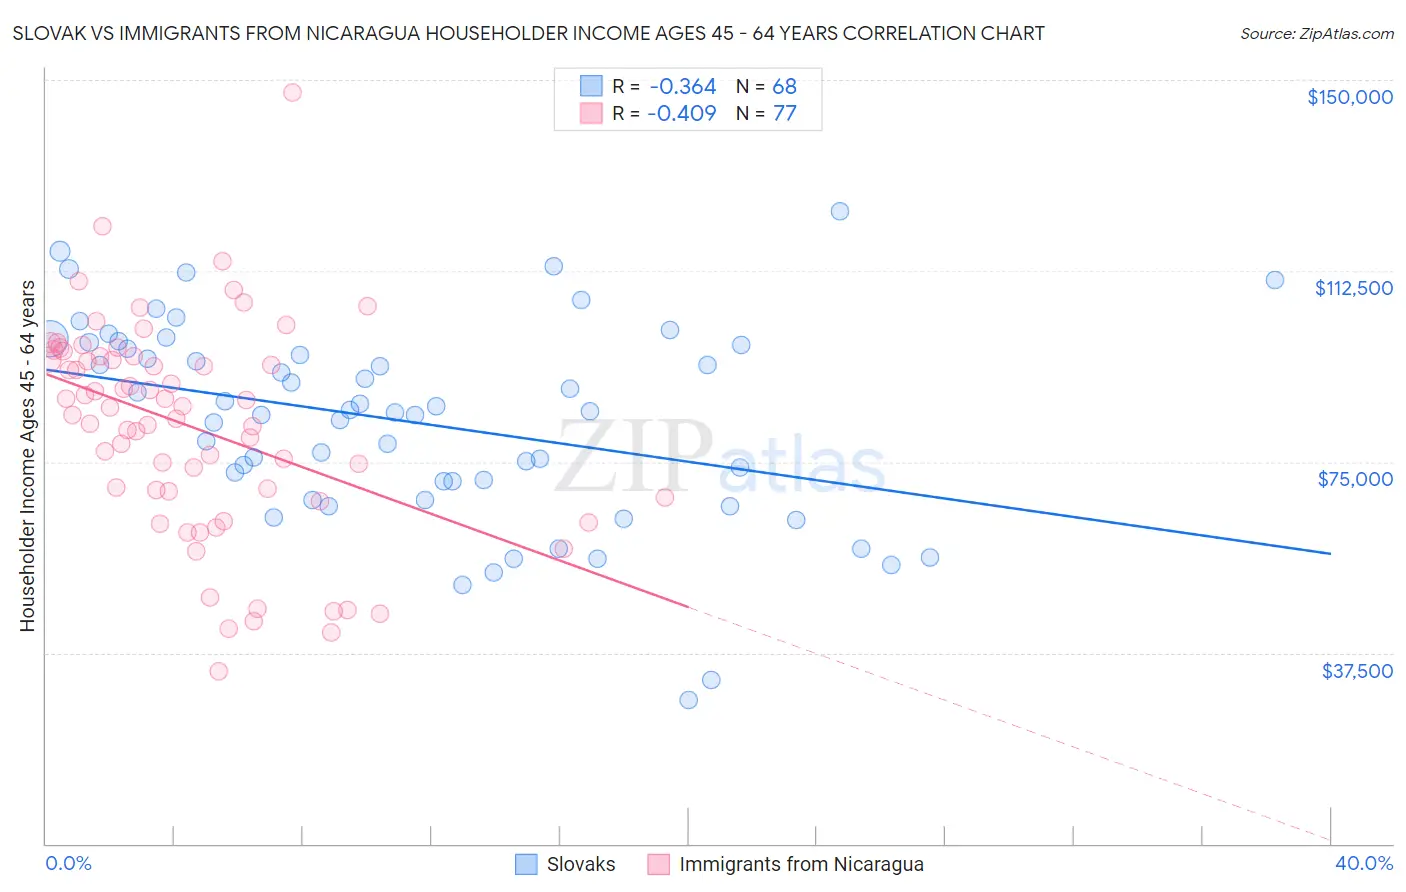 Slovak vs Immigrants from Nicaragua Householder Income Ages 45 - 64 years